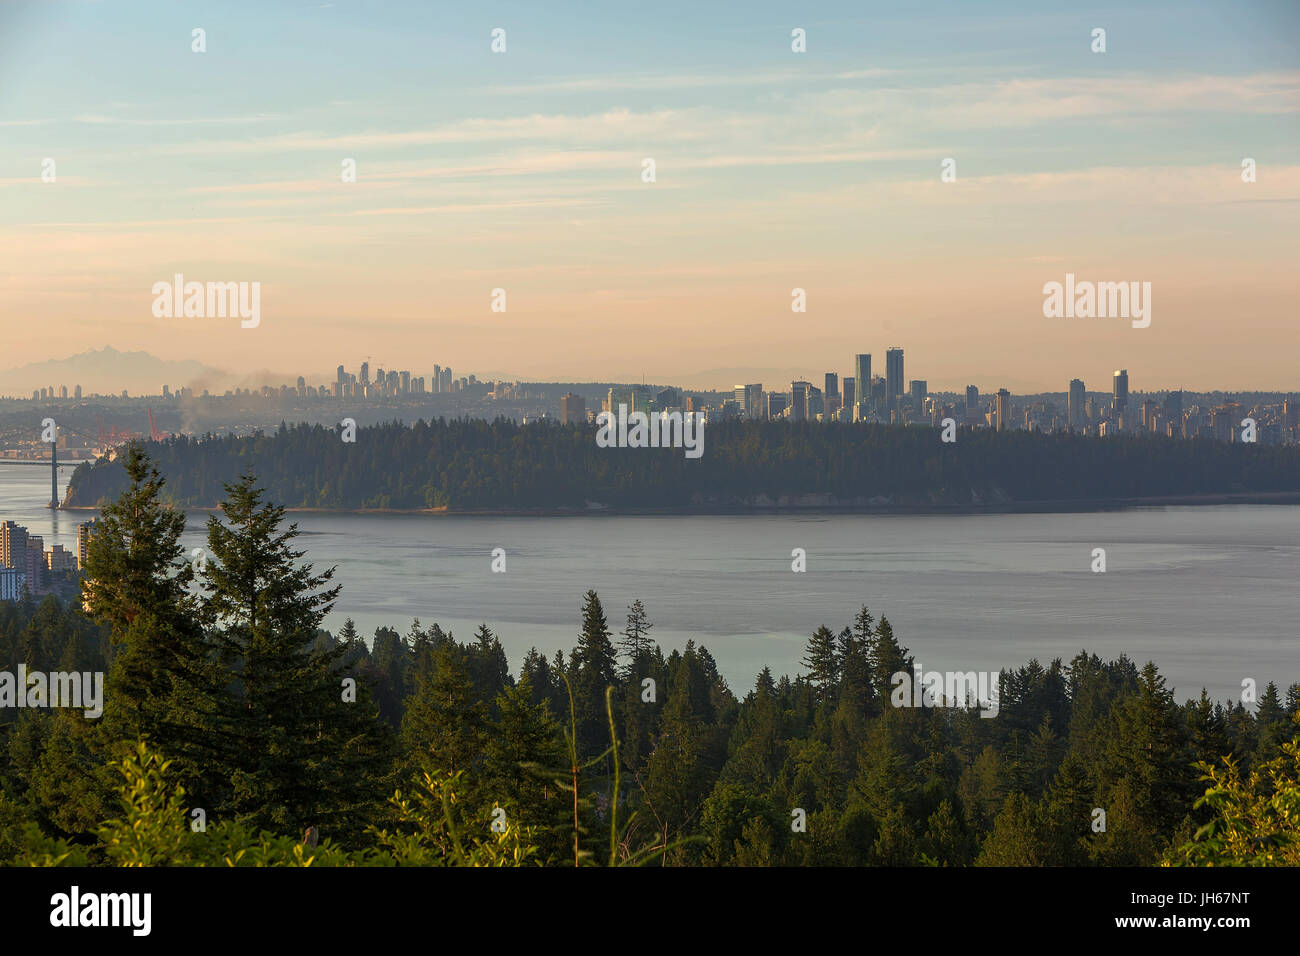 City skyline view of Vancouver and Burnaby by Stanley Park during sunrise Stock Photo